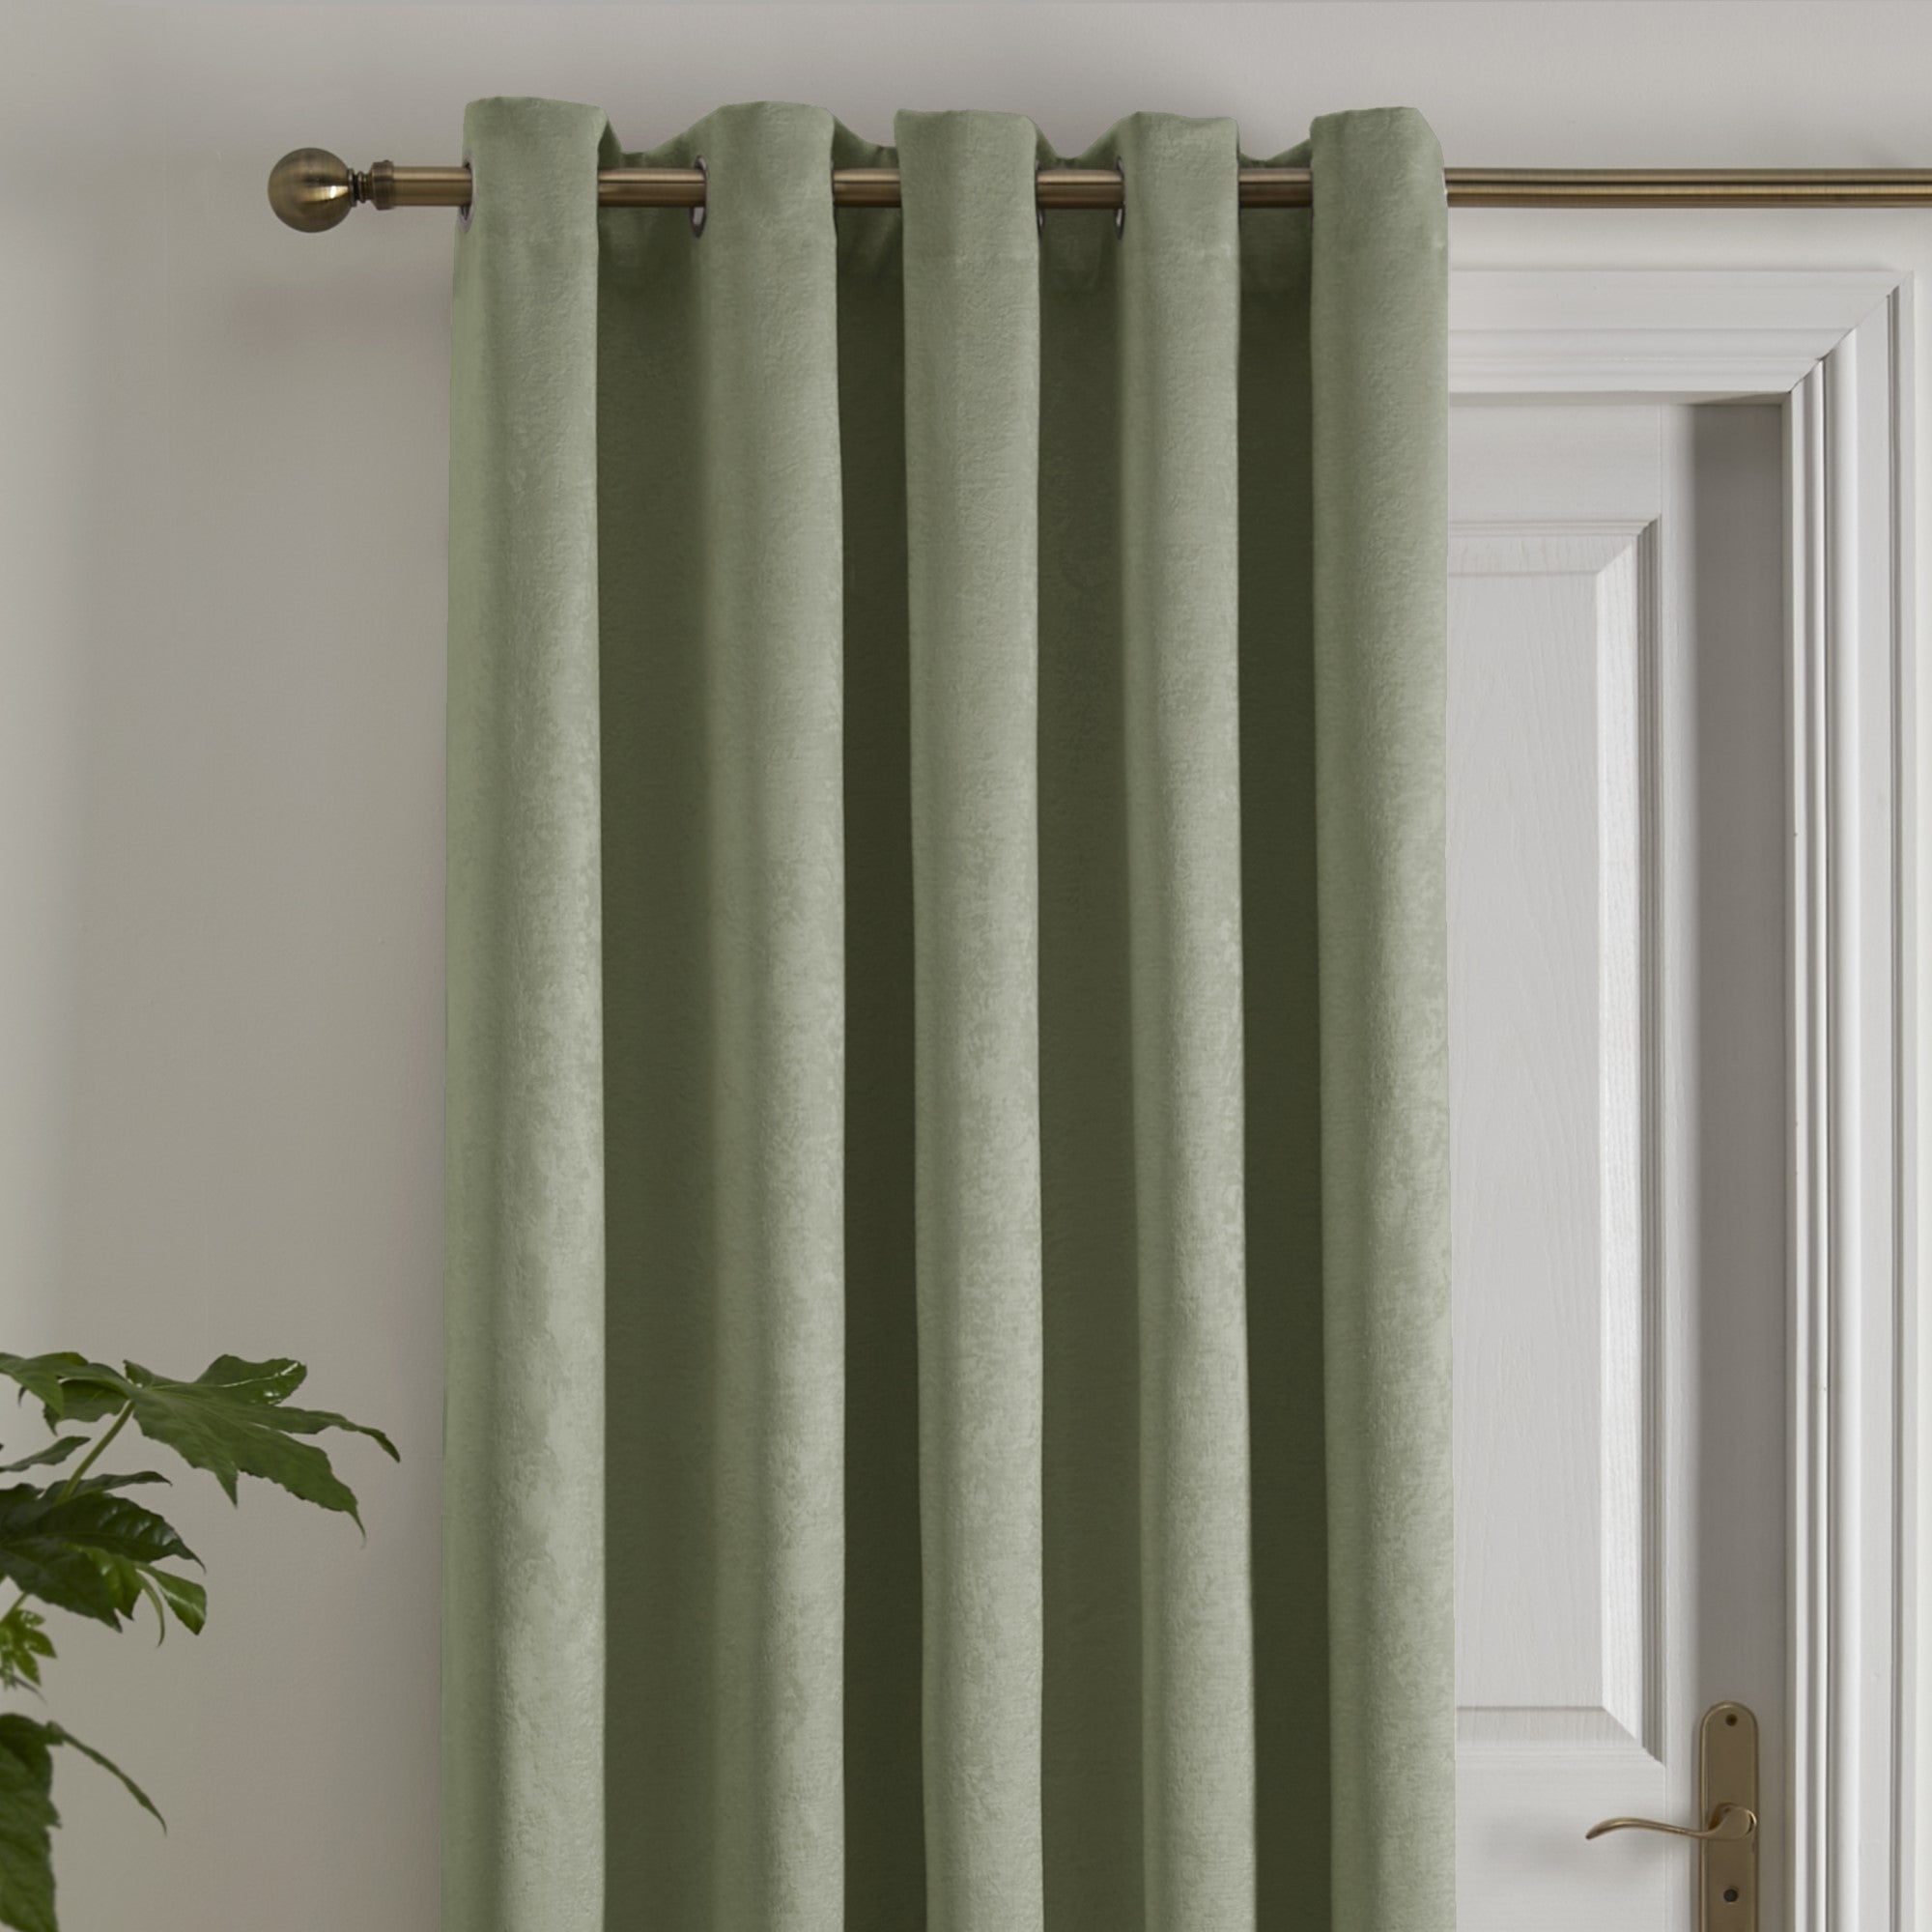 Eyelet Single Panel Door Curtain Strata by Fusion in Green